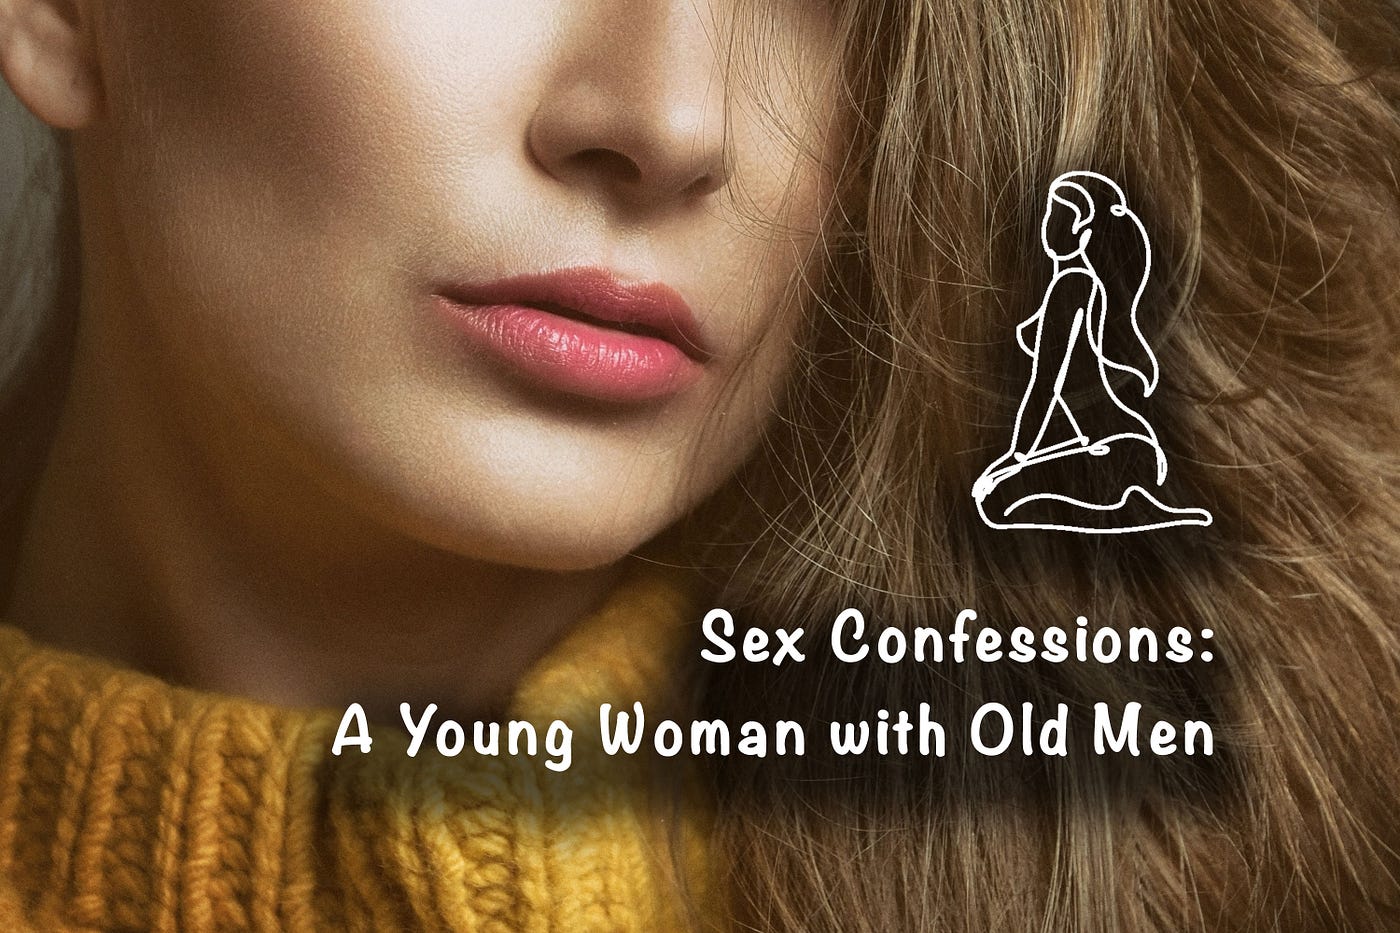 Index of Sex Confessions about My Sex Life as a Young Woman with Old Men and Sugar Daddies by Delisha Keane Bare Skin Cafe Medium